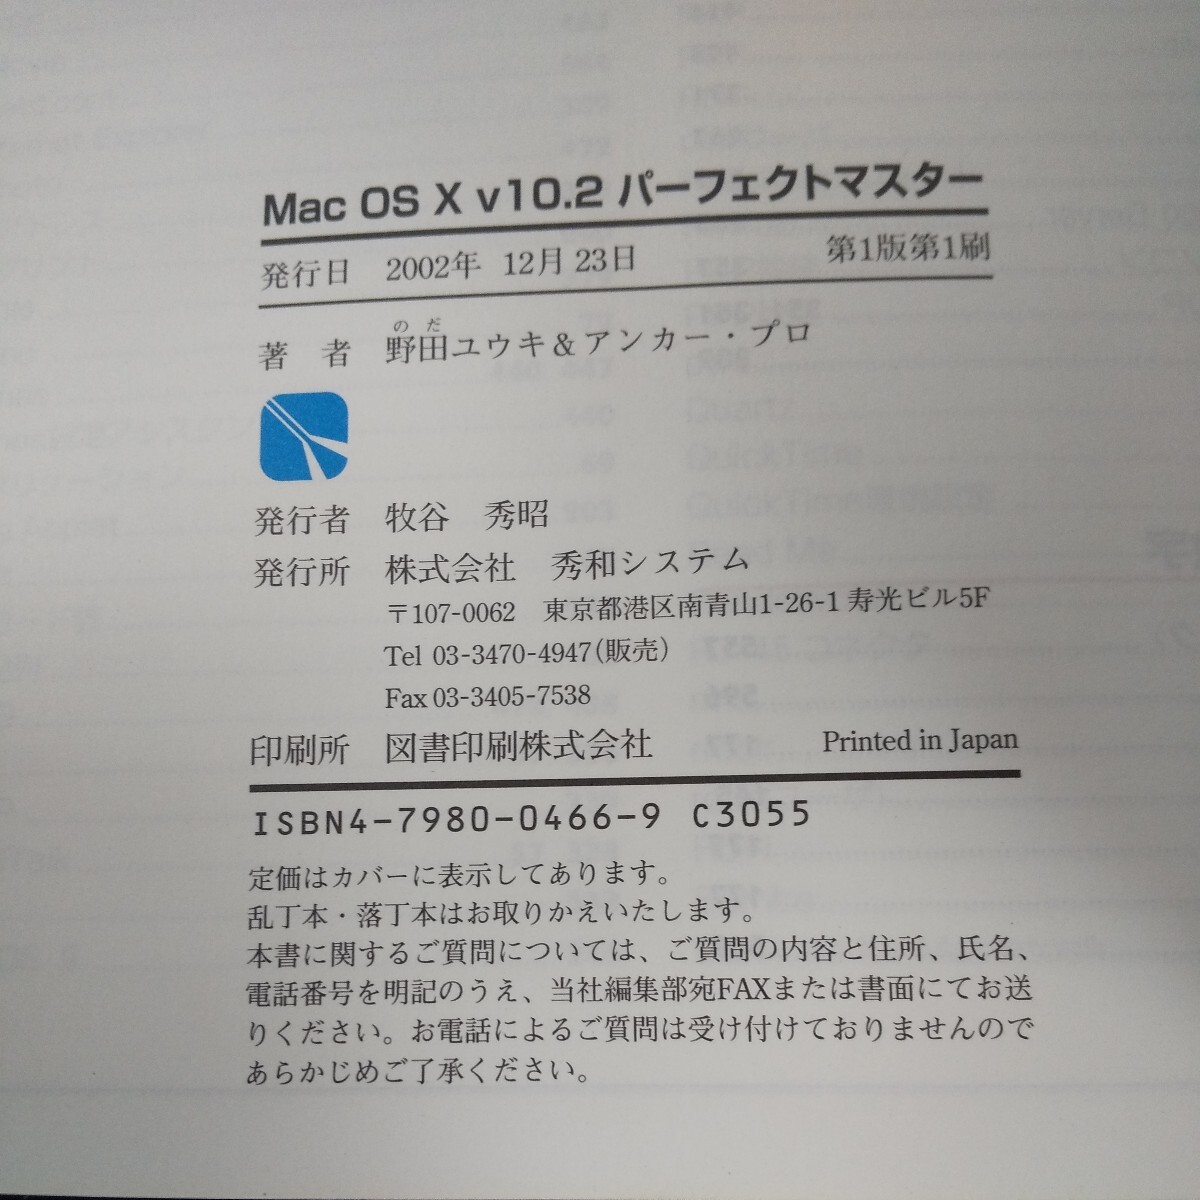 L-221 Mac OS X Perfect master 62 VERSION 10.2 complete correspondence Noda yu float & anchor * Pro preeminence peace system 2002 year no. 1 version no. 1. issue *10